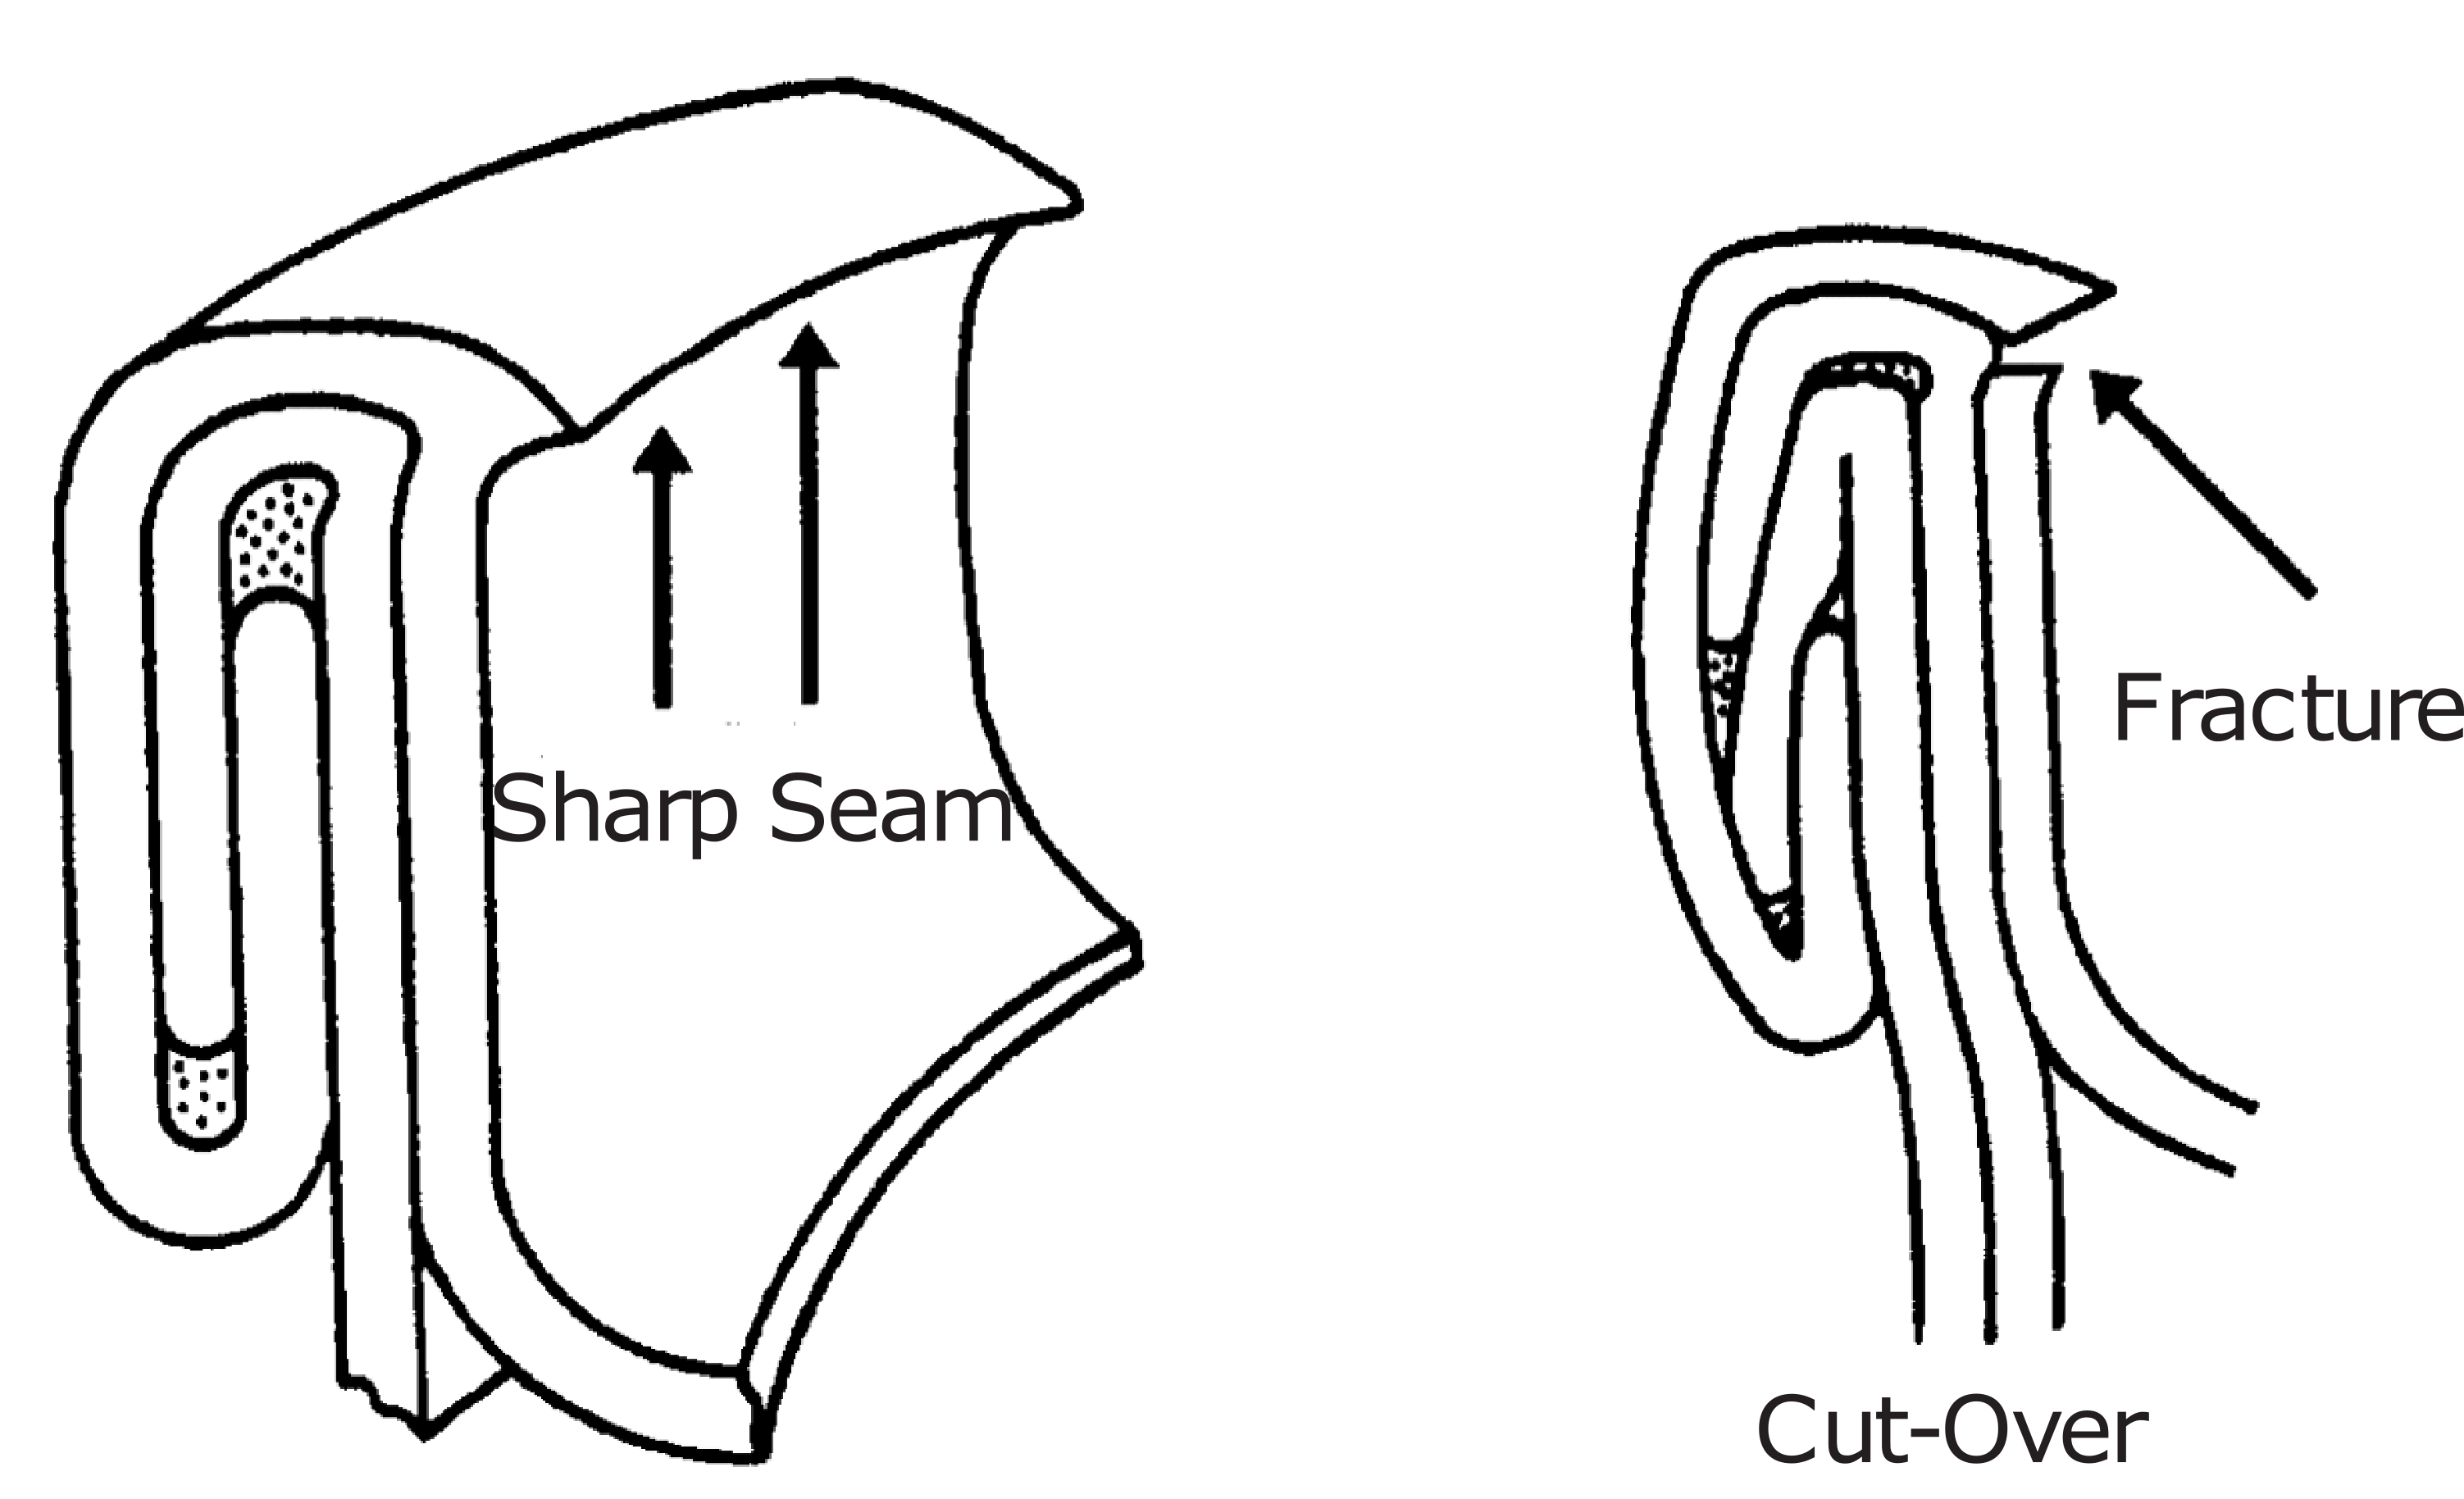 Seam labeled sharp seam and cut-over labeled fracture